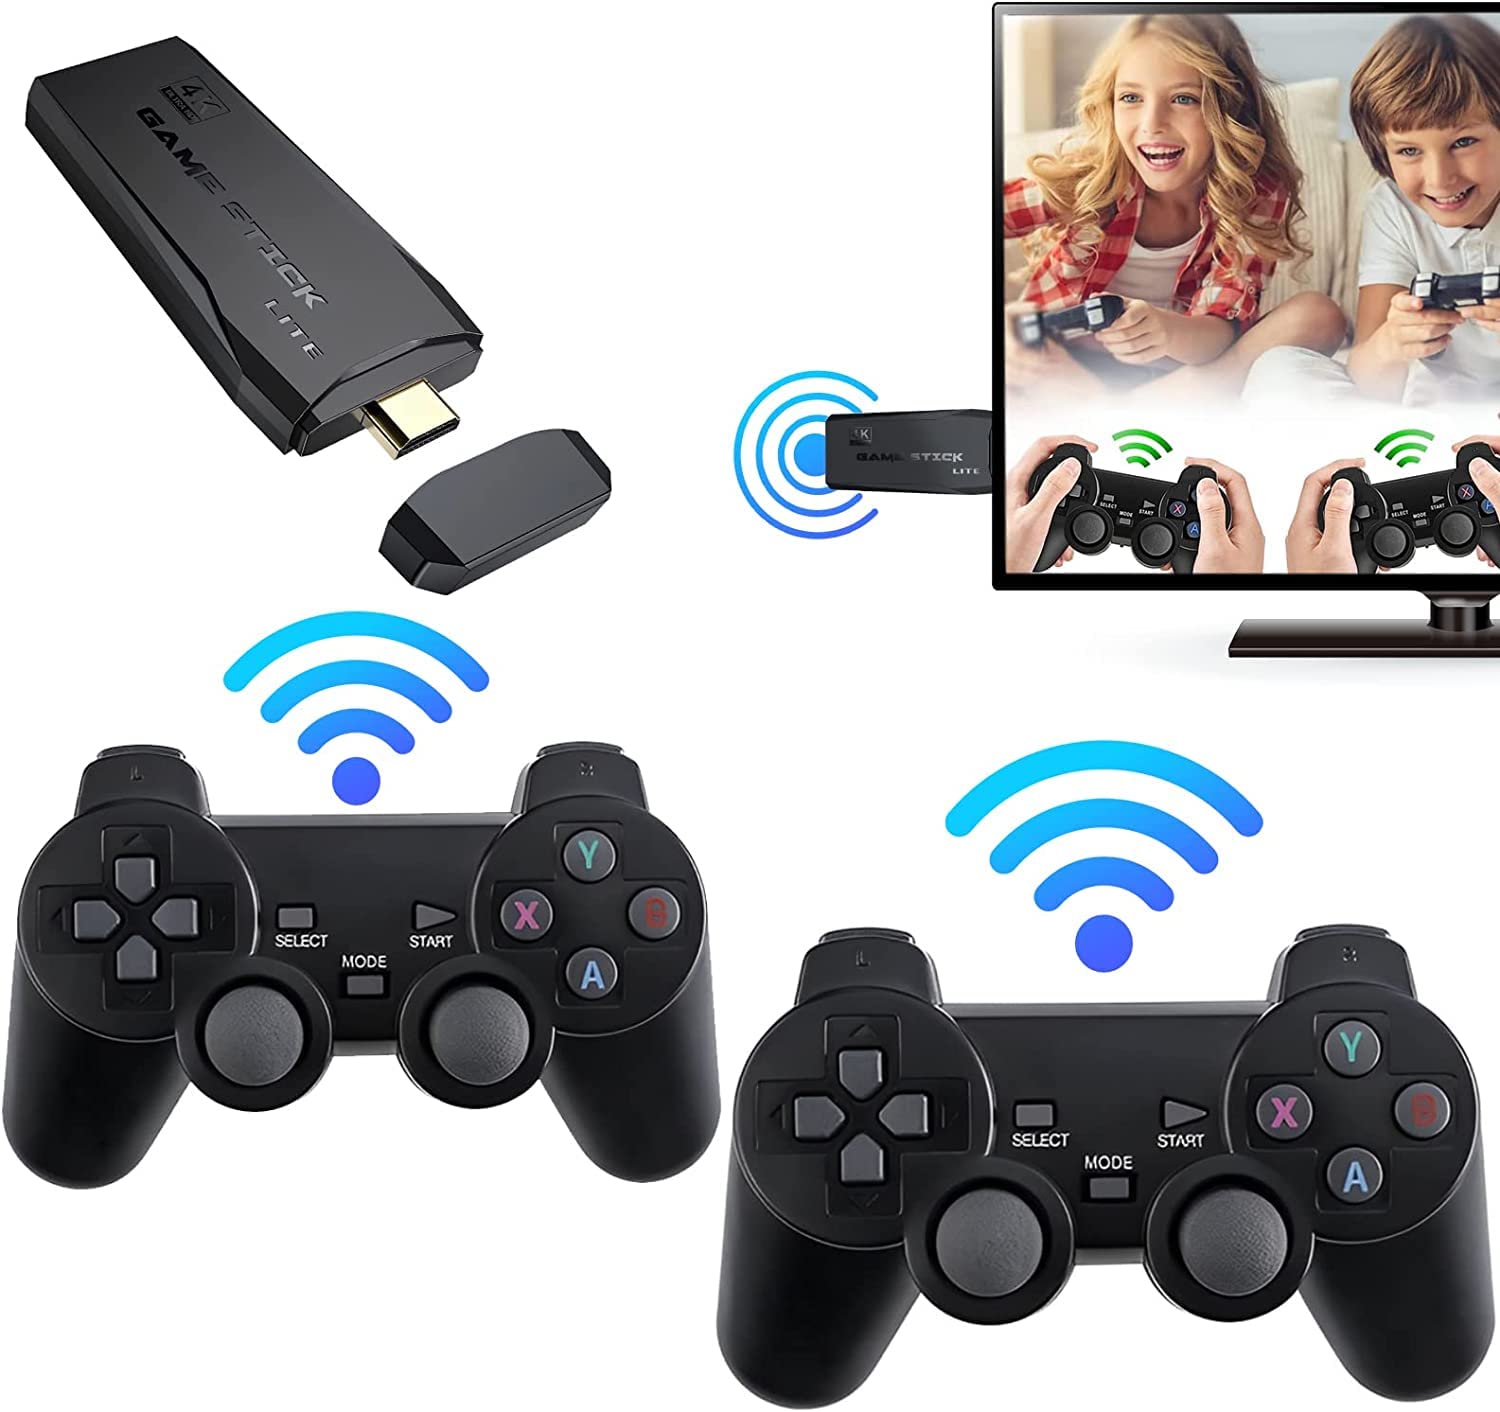 Retro Game Console,Retro Game Stick,Nostalgia Stick Game,4K HDMI Output,Plug and Play Video Game Stick Built in 10000+ Games,9 Classic Emulators, with Dual 2.4G Wireless Controllers